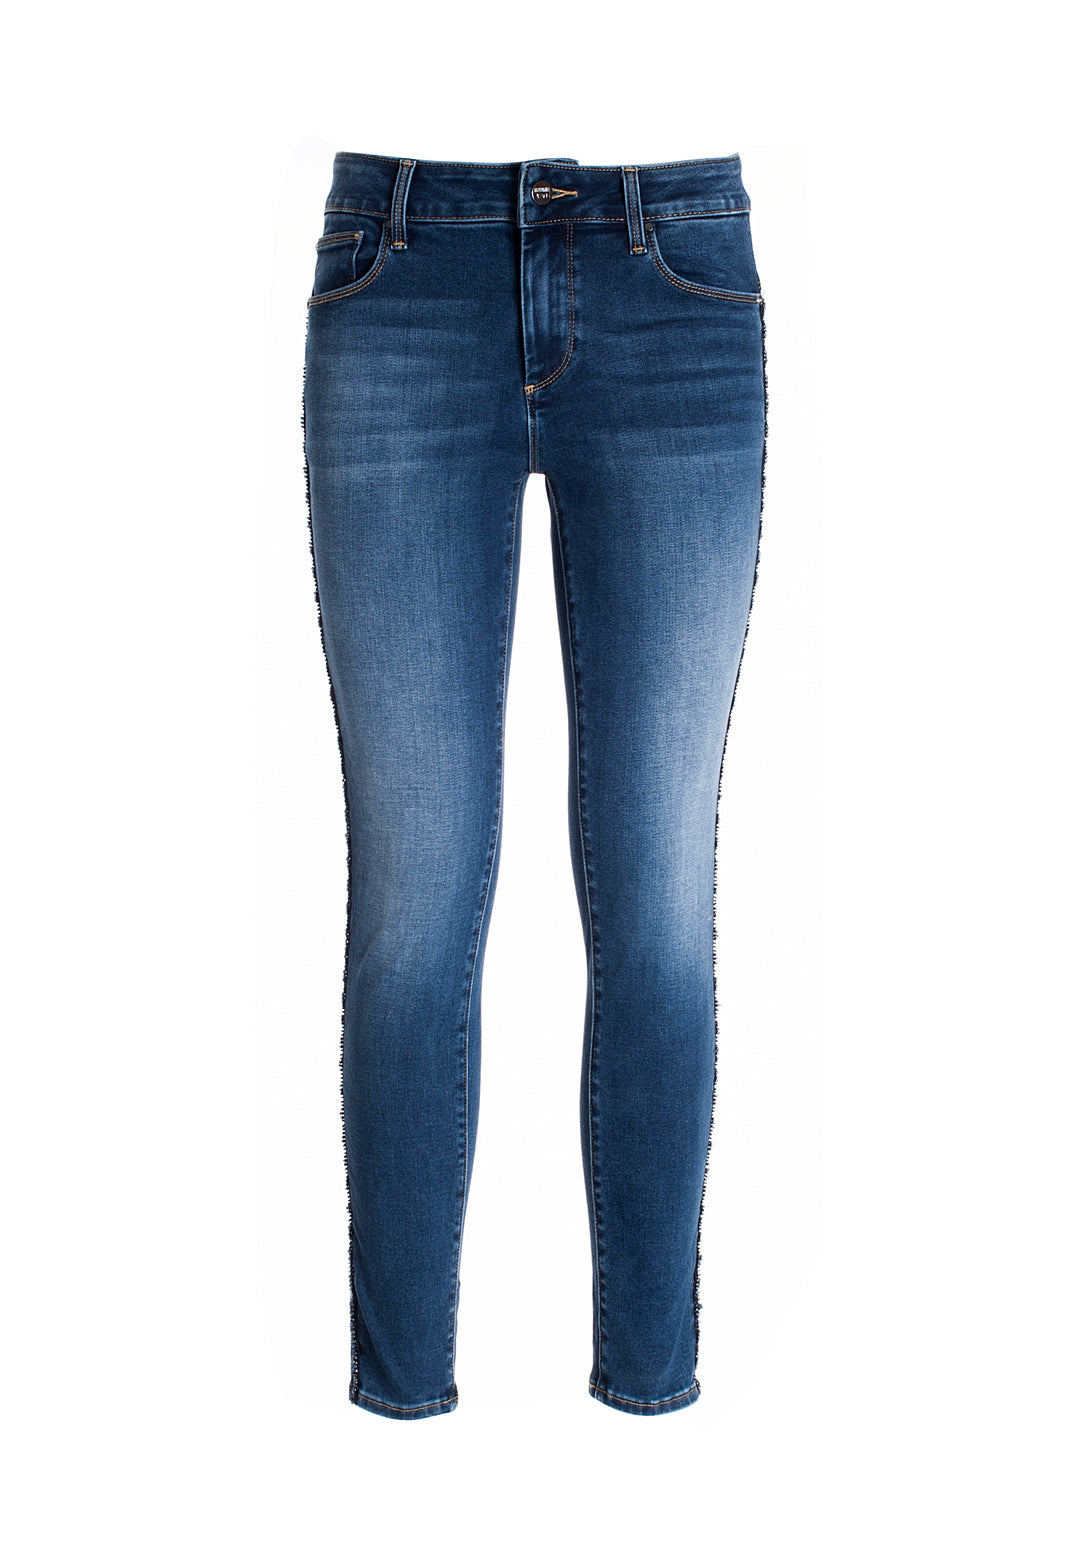 Jeans skinny fit with push-up effect made in stretch denim with middle wash